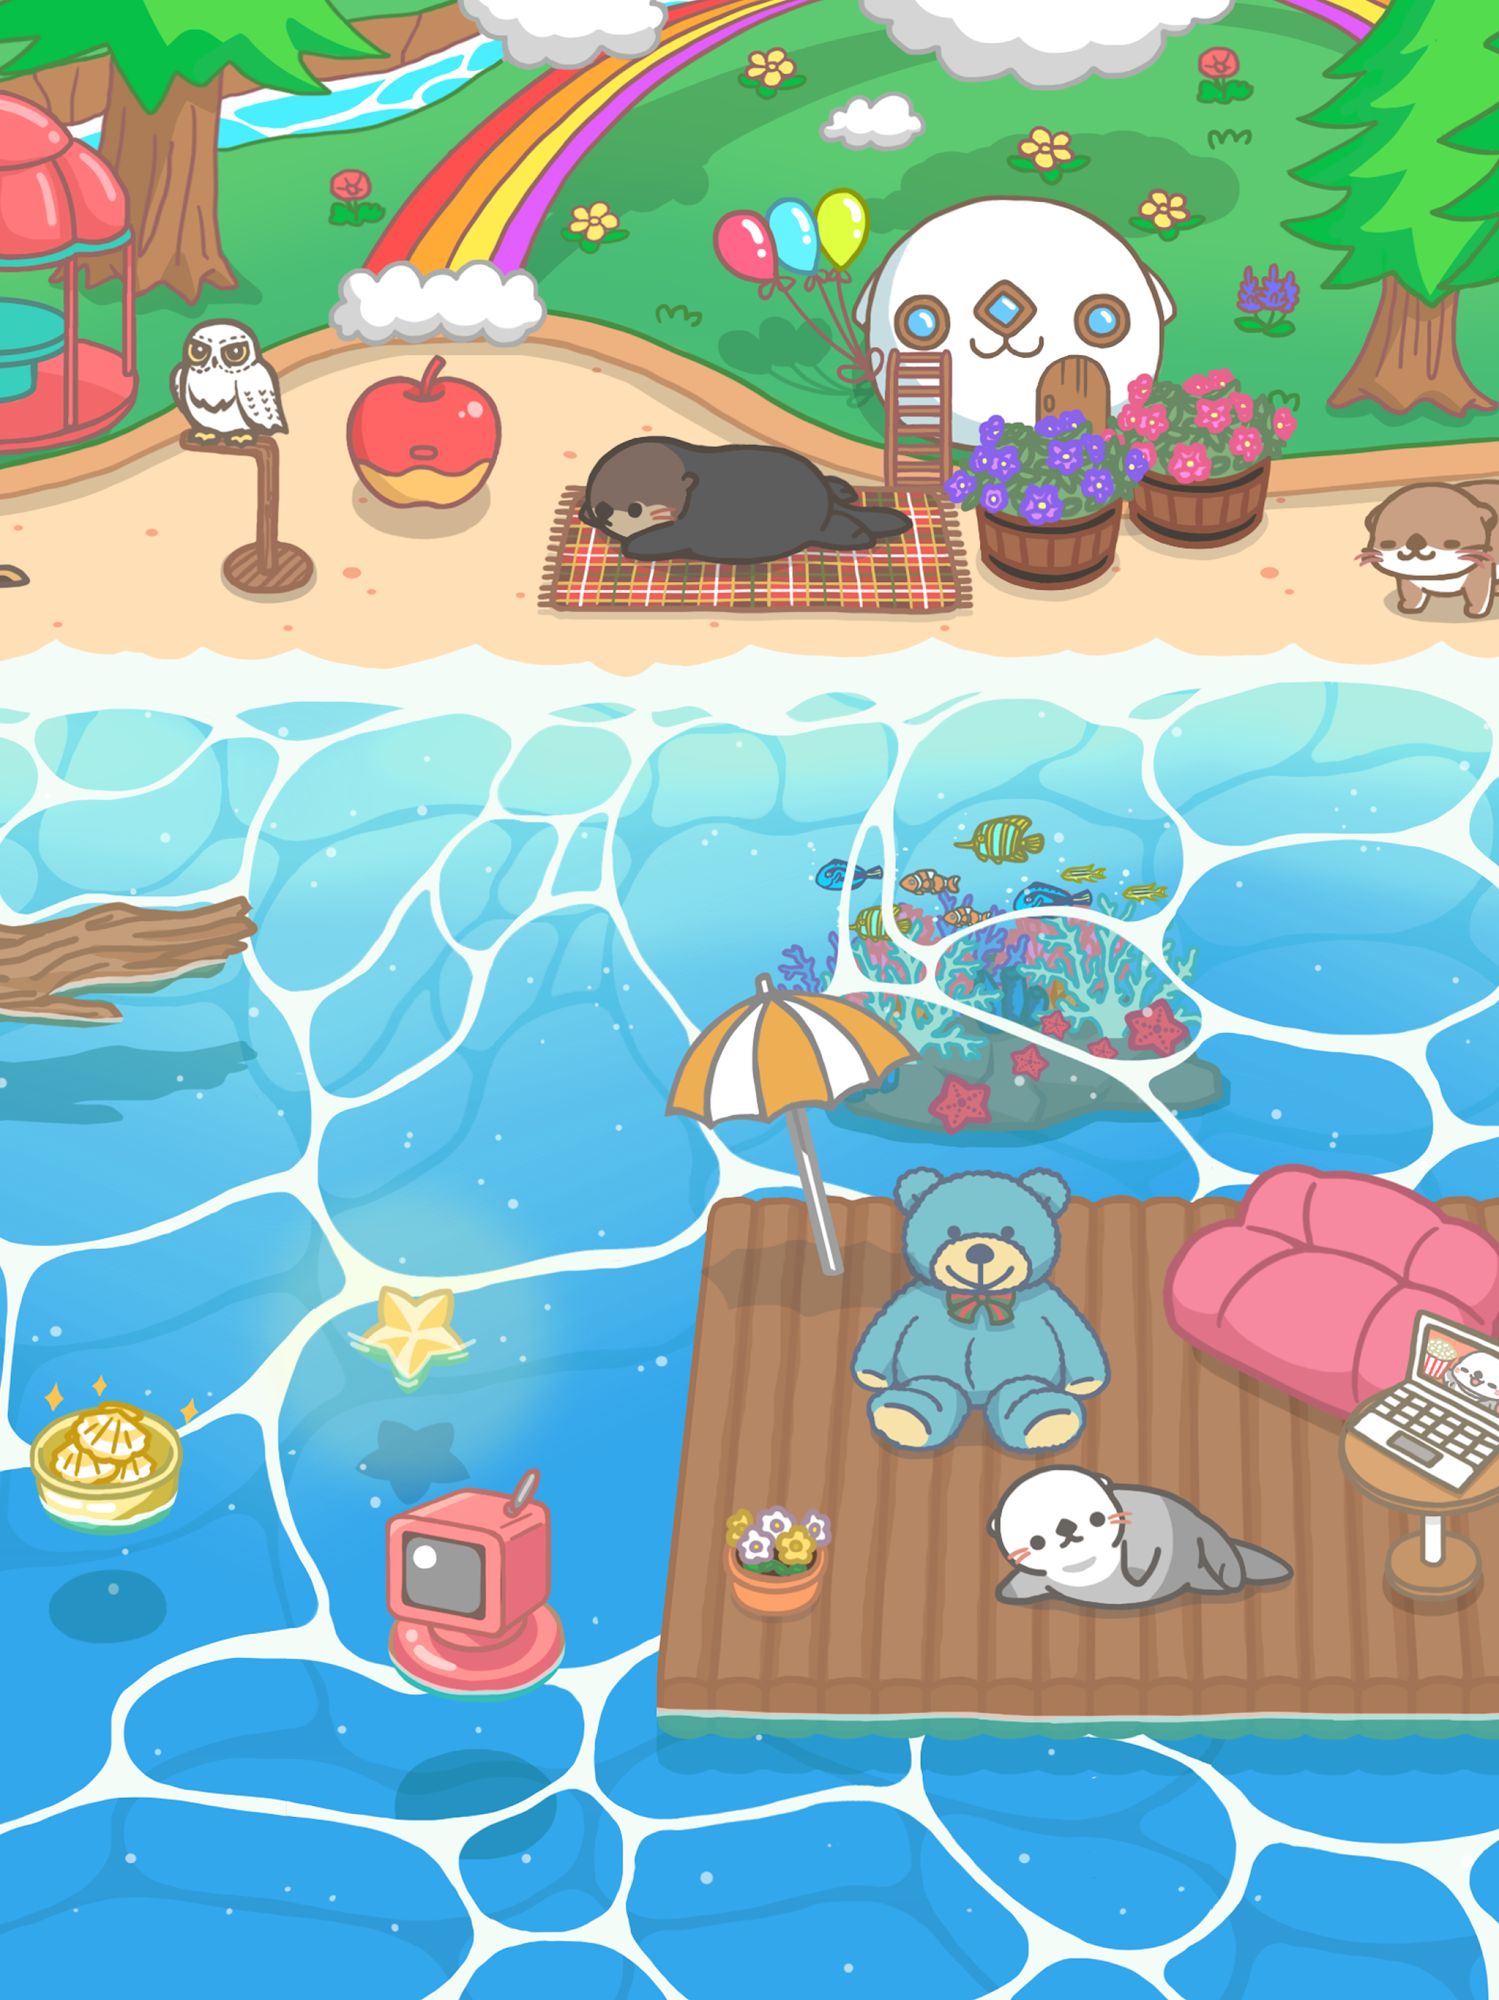 Rakko Ukabe - Let's call cute sea otters! для Android